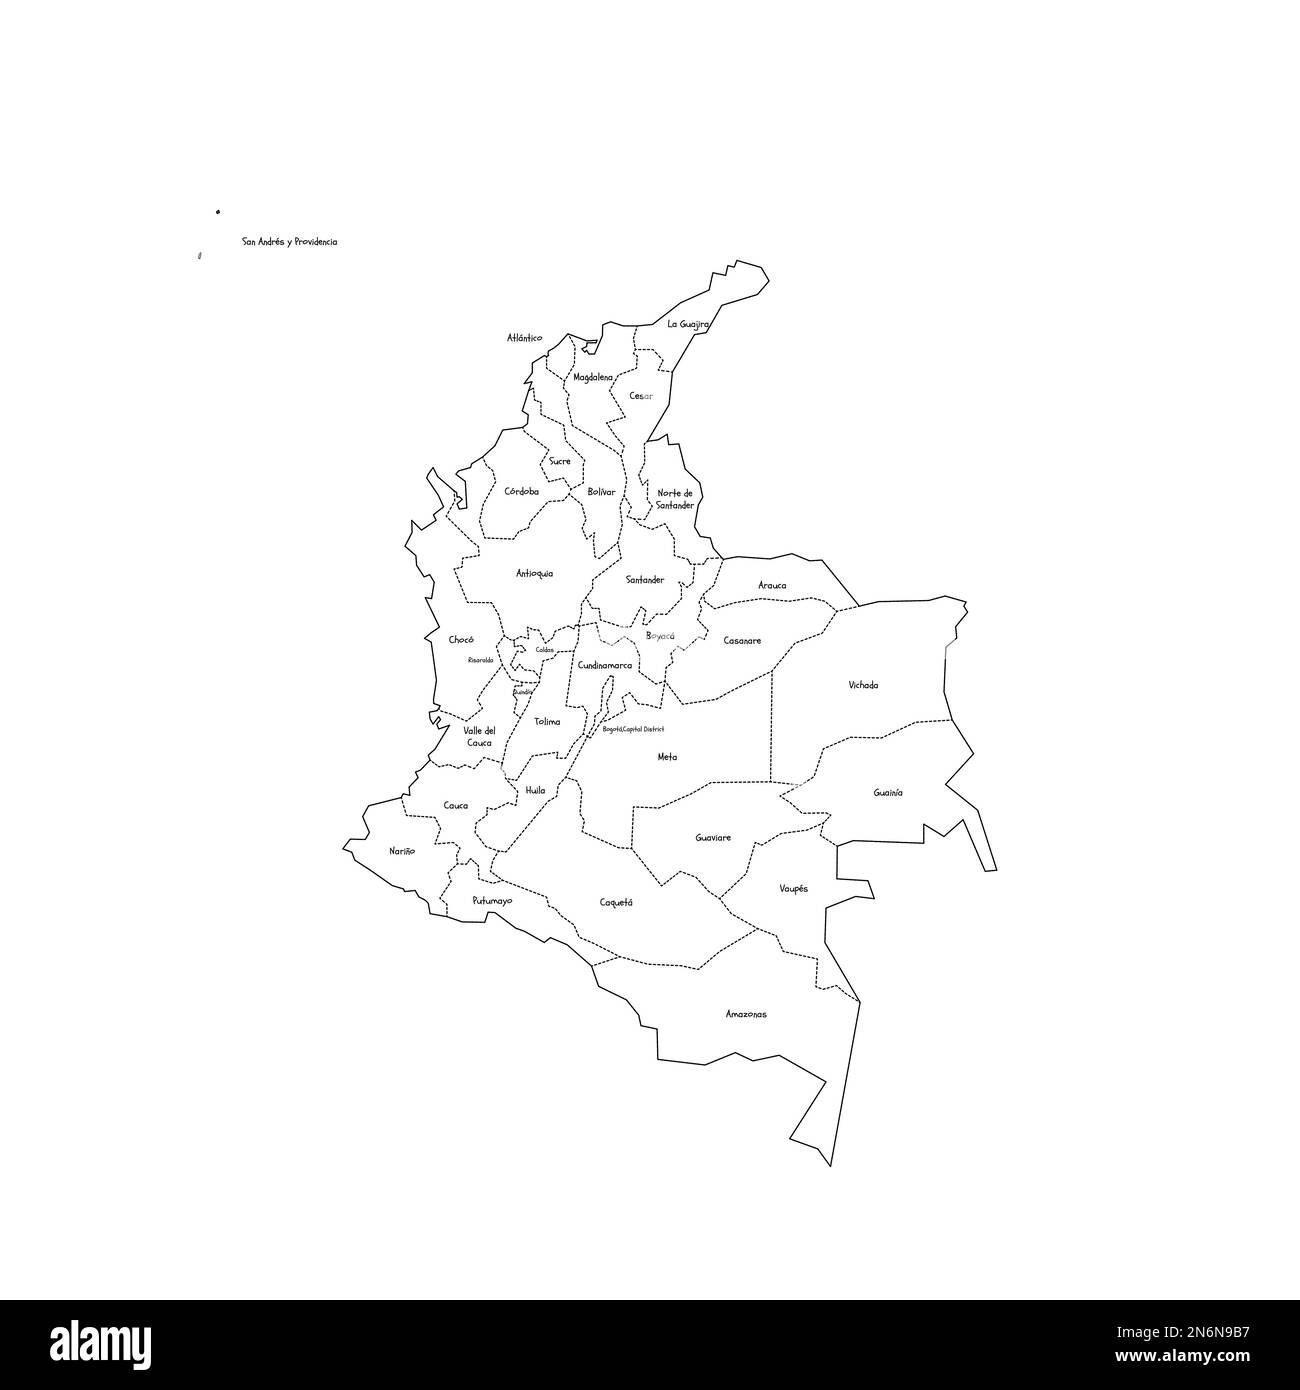 Colombia political map of administrative divisions - departments and capital district. Handdrawn doodle style map with black outline borders and name labels. Stock Vector